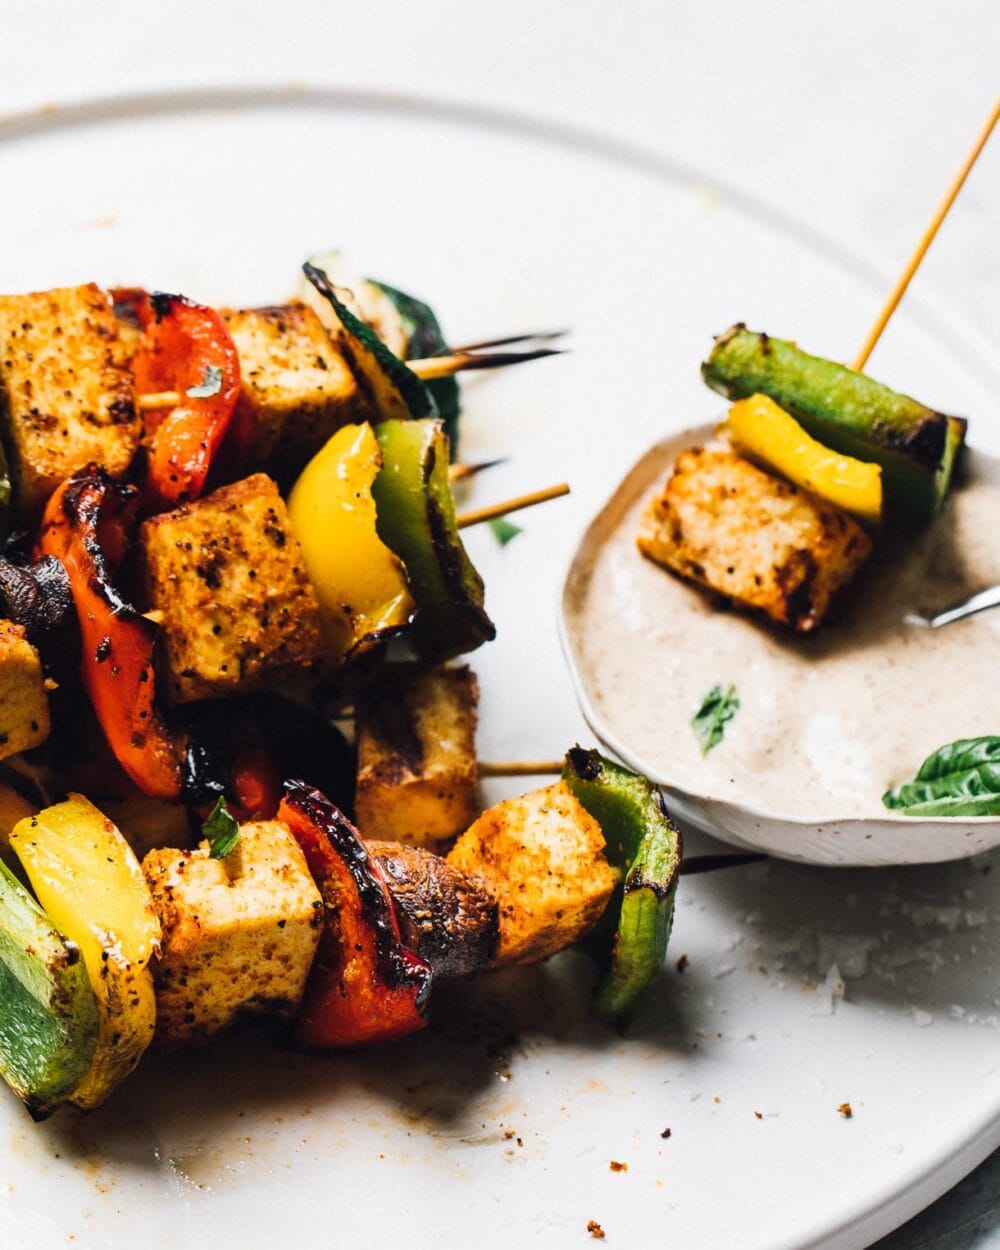 grilled veggie skewers with tofu on a white plate, with side of dipping sauce to the right of plate.